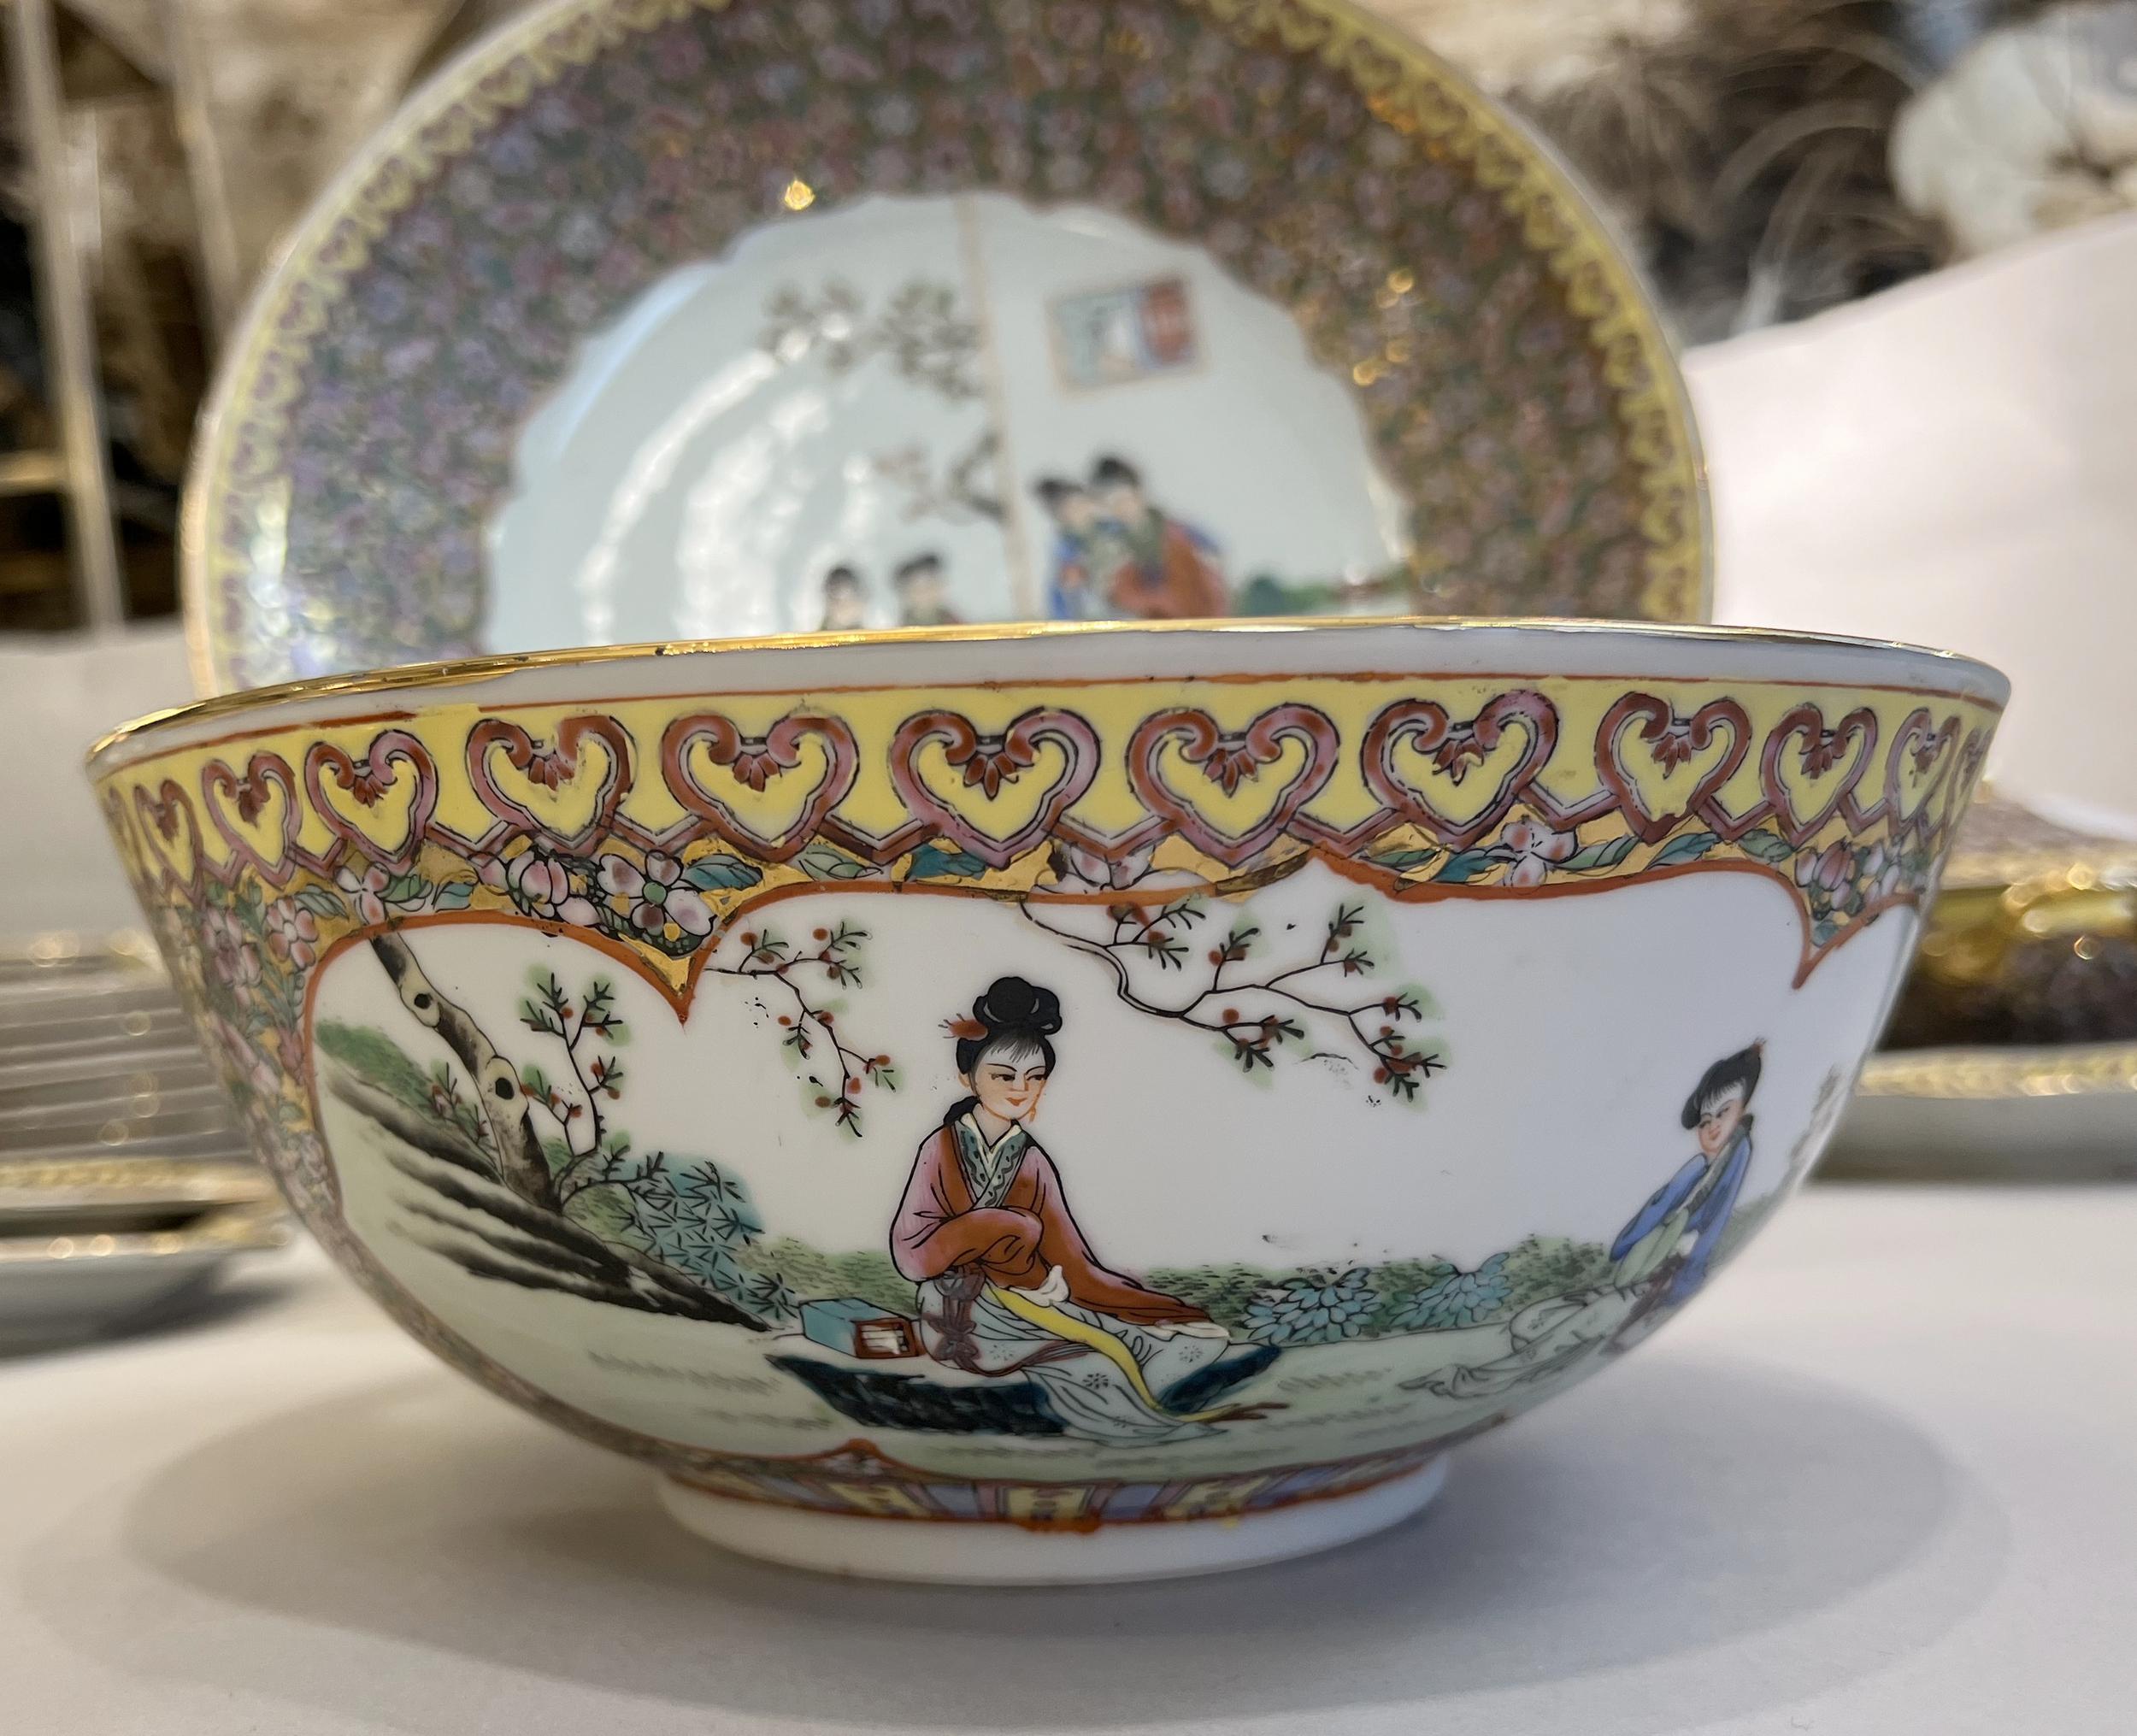 Large Chinese porcelain dinner service, circa 1950/1970, decorated with scenes of domestic life.
It has been used very little and is in perfect condition.
It consists of:
12 dinner plates, 12 soup plates, 12 dessert plates, 12 smaller plates, 12